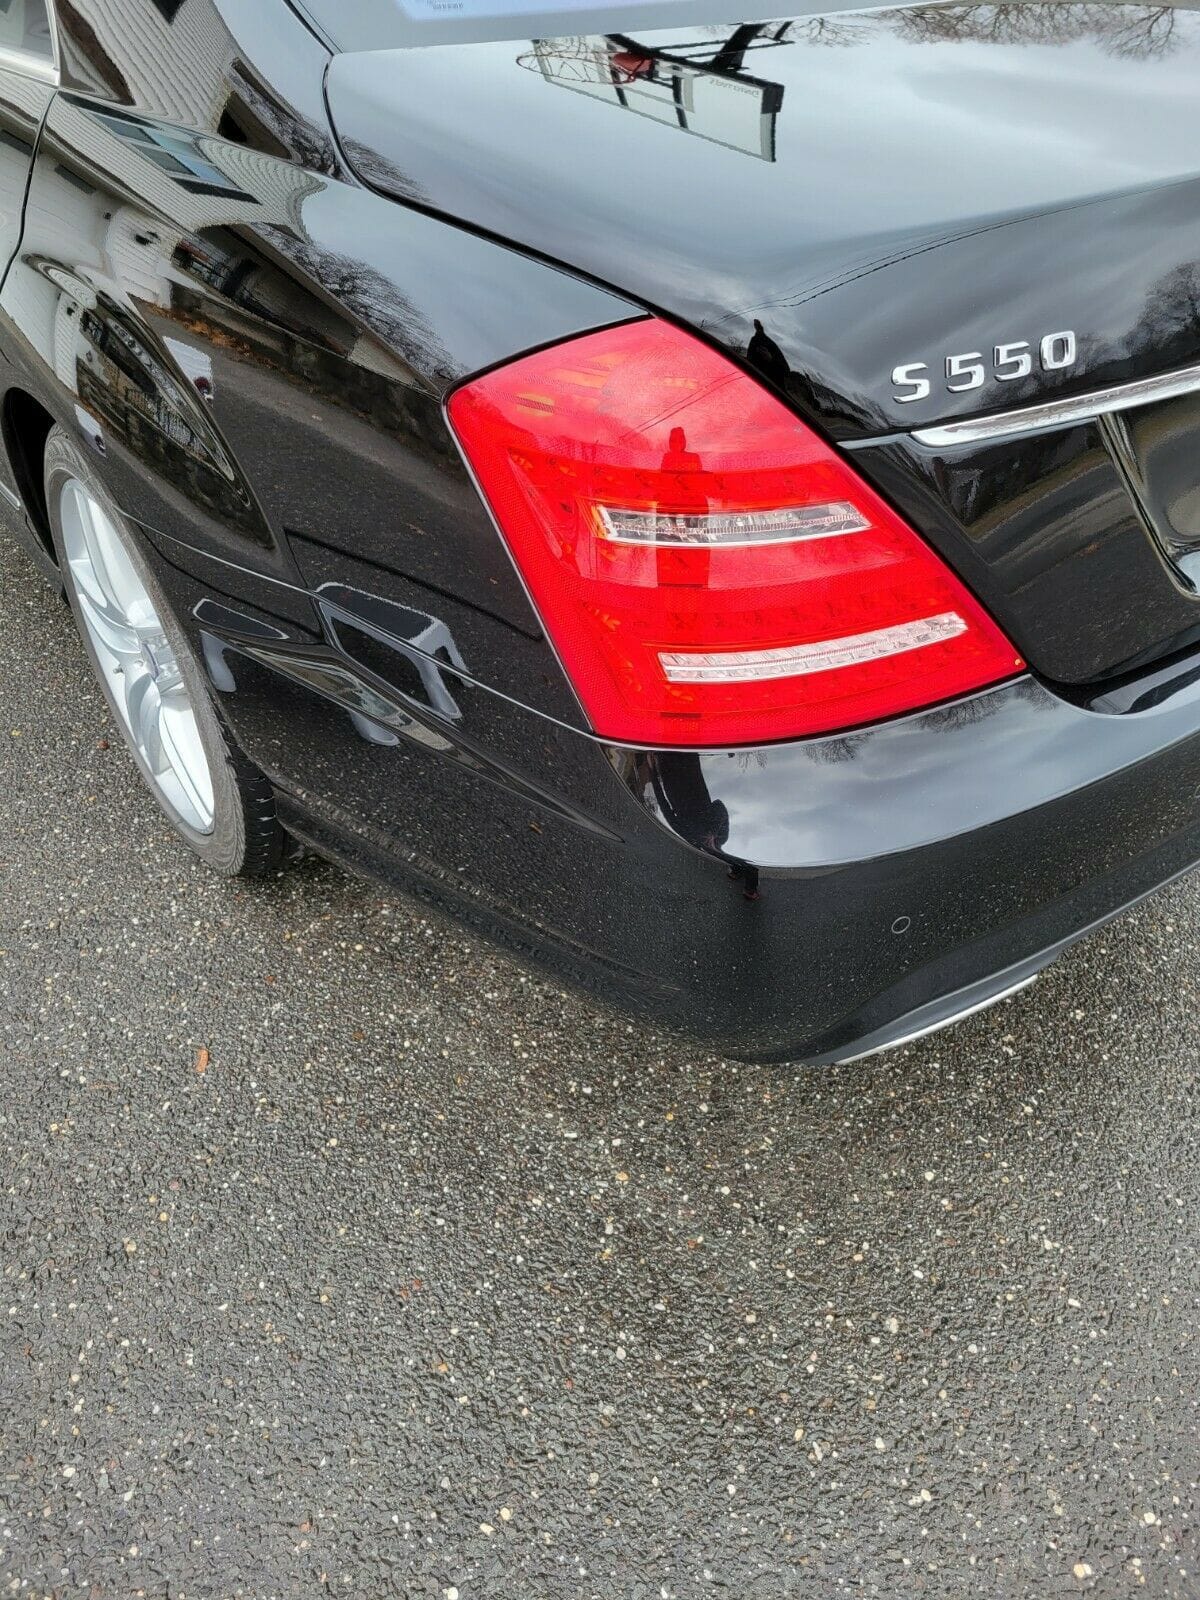 Exterior Body Parts - FS: Mercedes W221 S550 S600 AMG Rear Bumper Cover Assembly Sport Black OEM - Used - 2007 to 2013 Mercedes-Benz S550 - Waterbury, CT 06708, United States